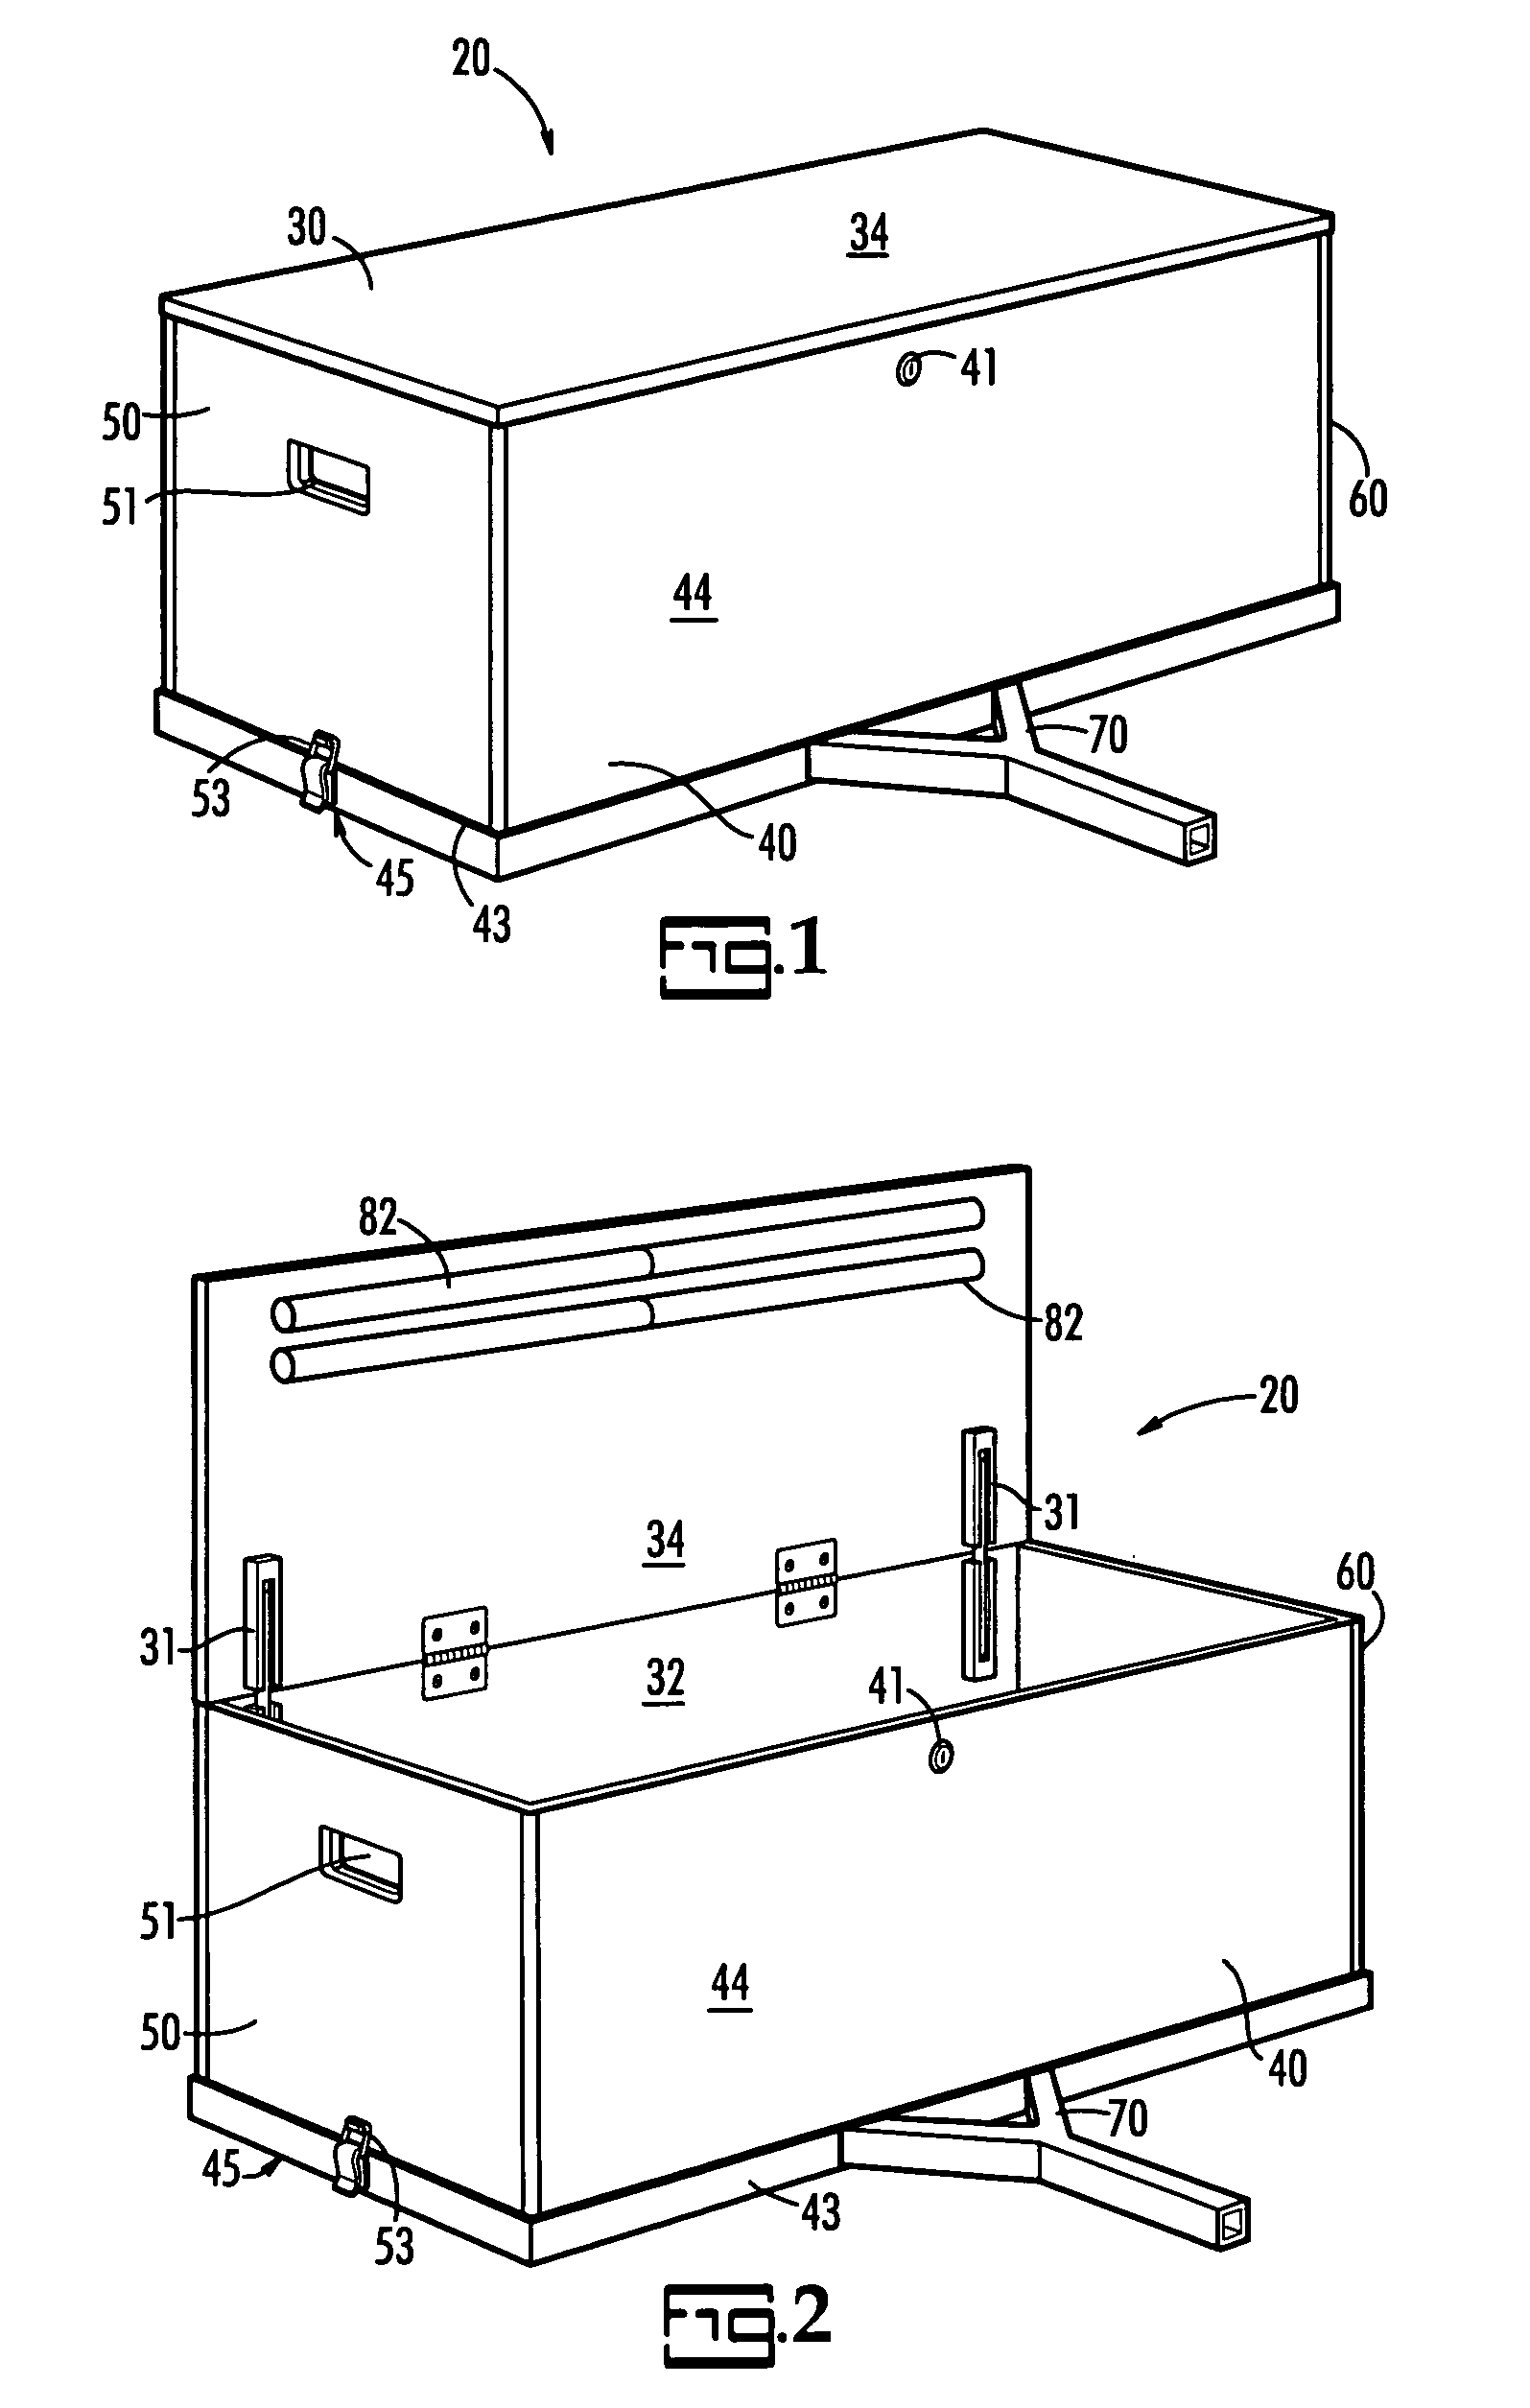 Convertible cargo container system